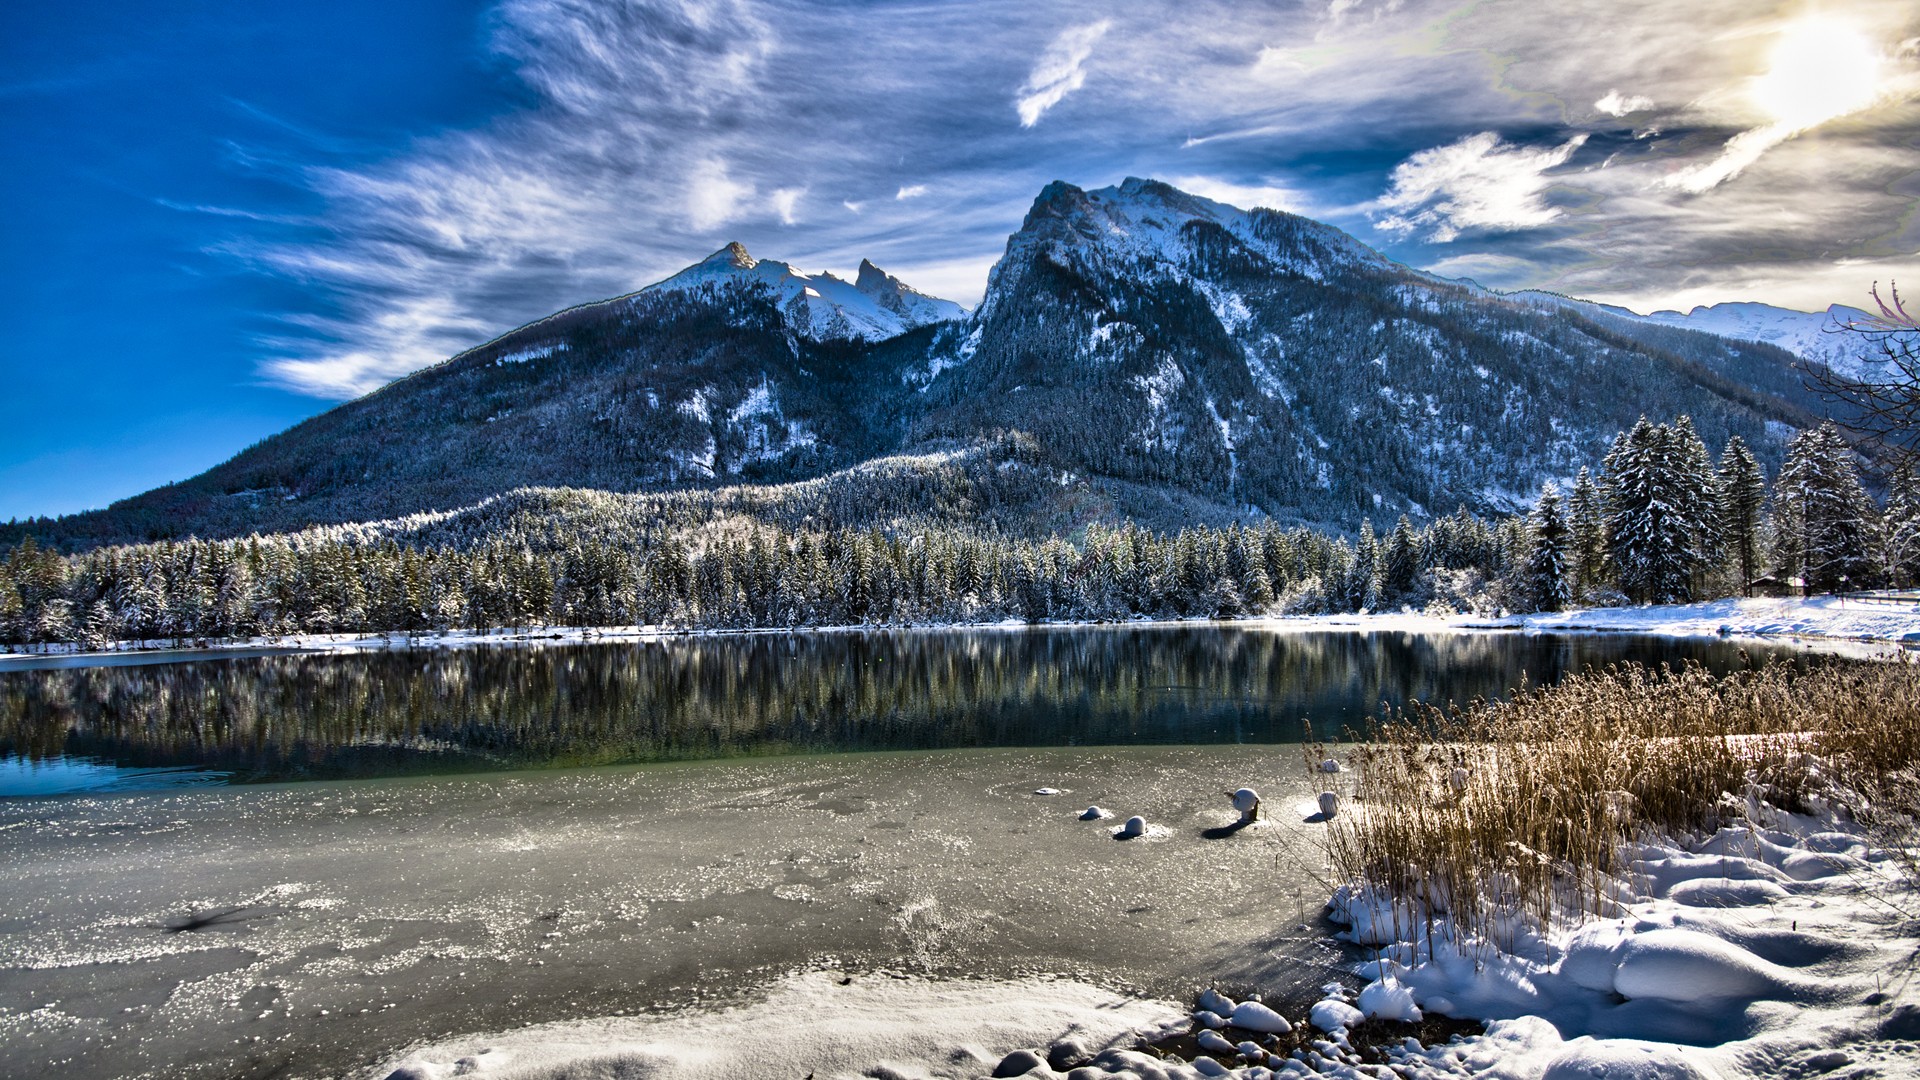 Mountains: Ice Mountains Frozen Sky Landscape Winter Cold Nature ...